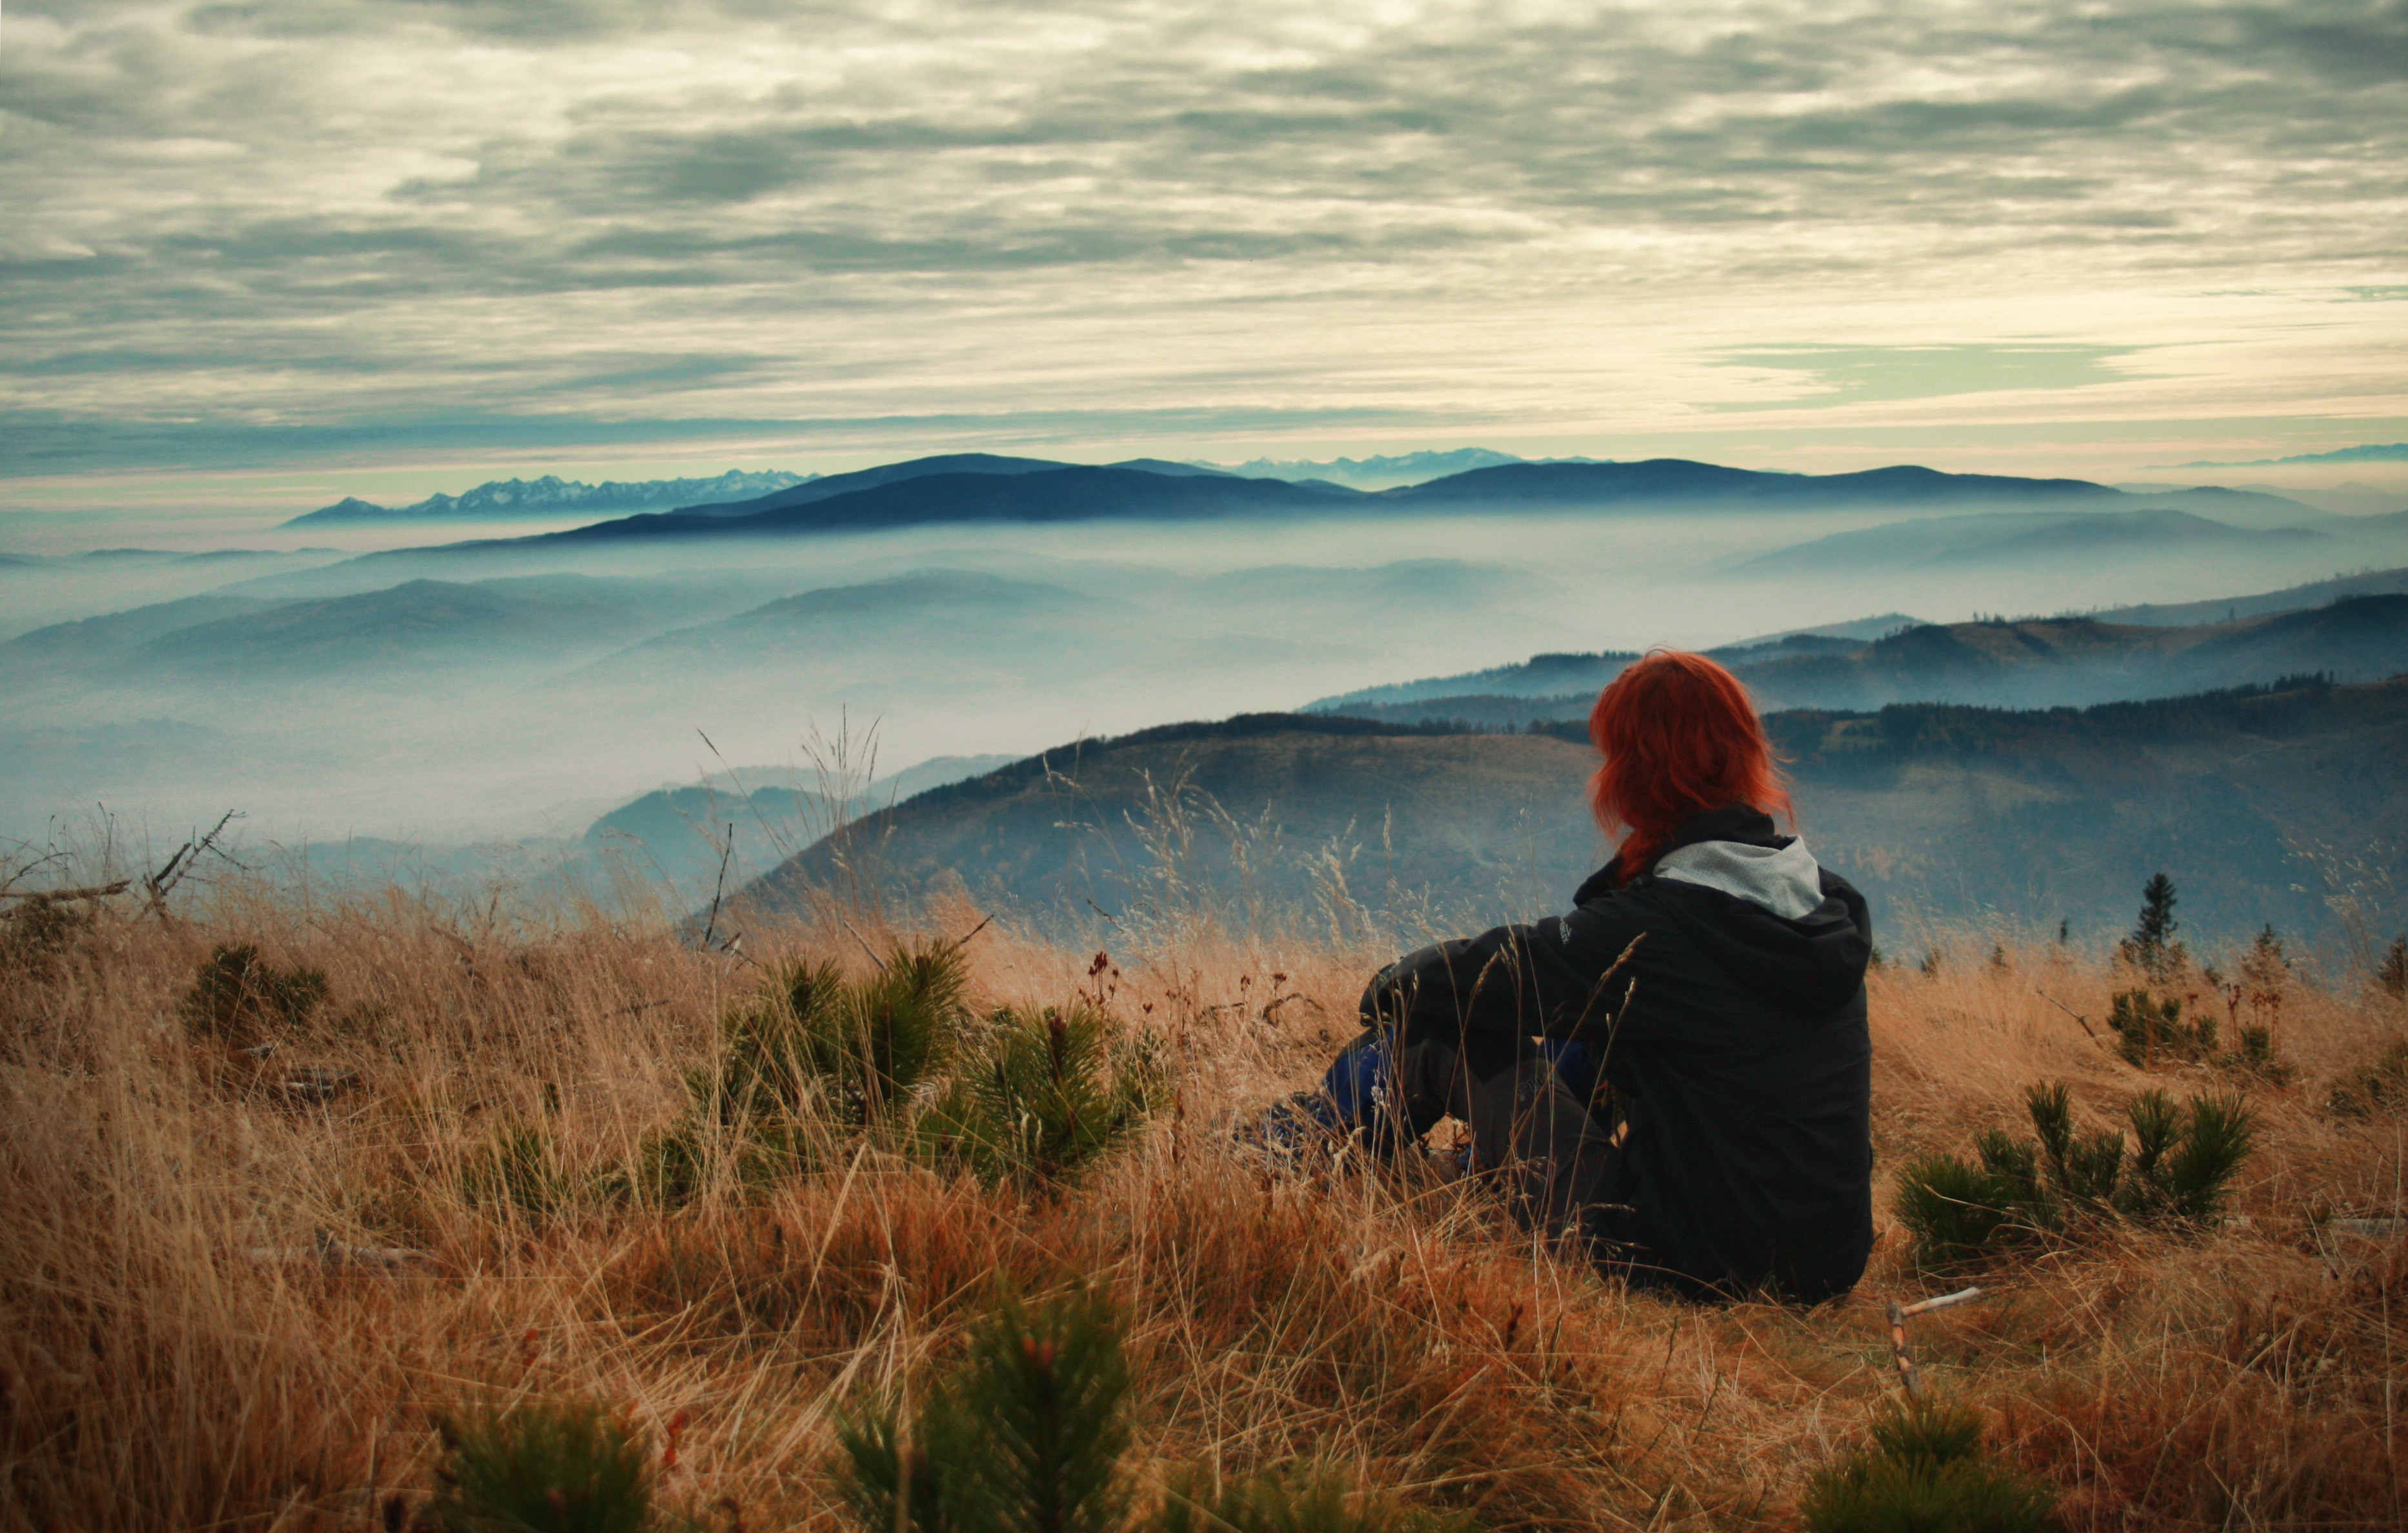 women, Mountains, Clouds, Landscapes, Nature, Redheads, Hills, Mountain, View Wallpaper